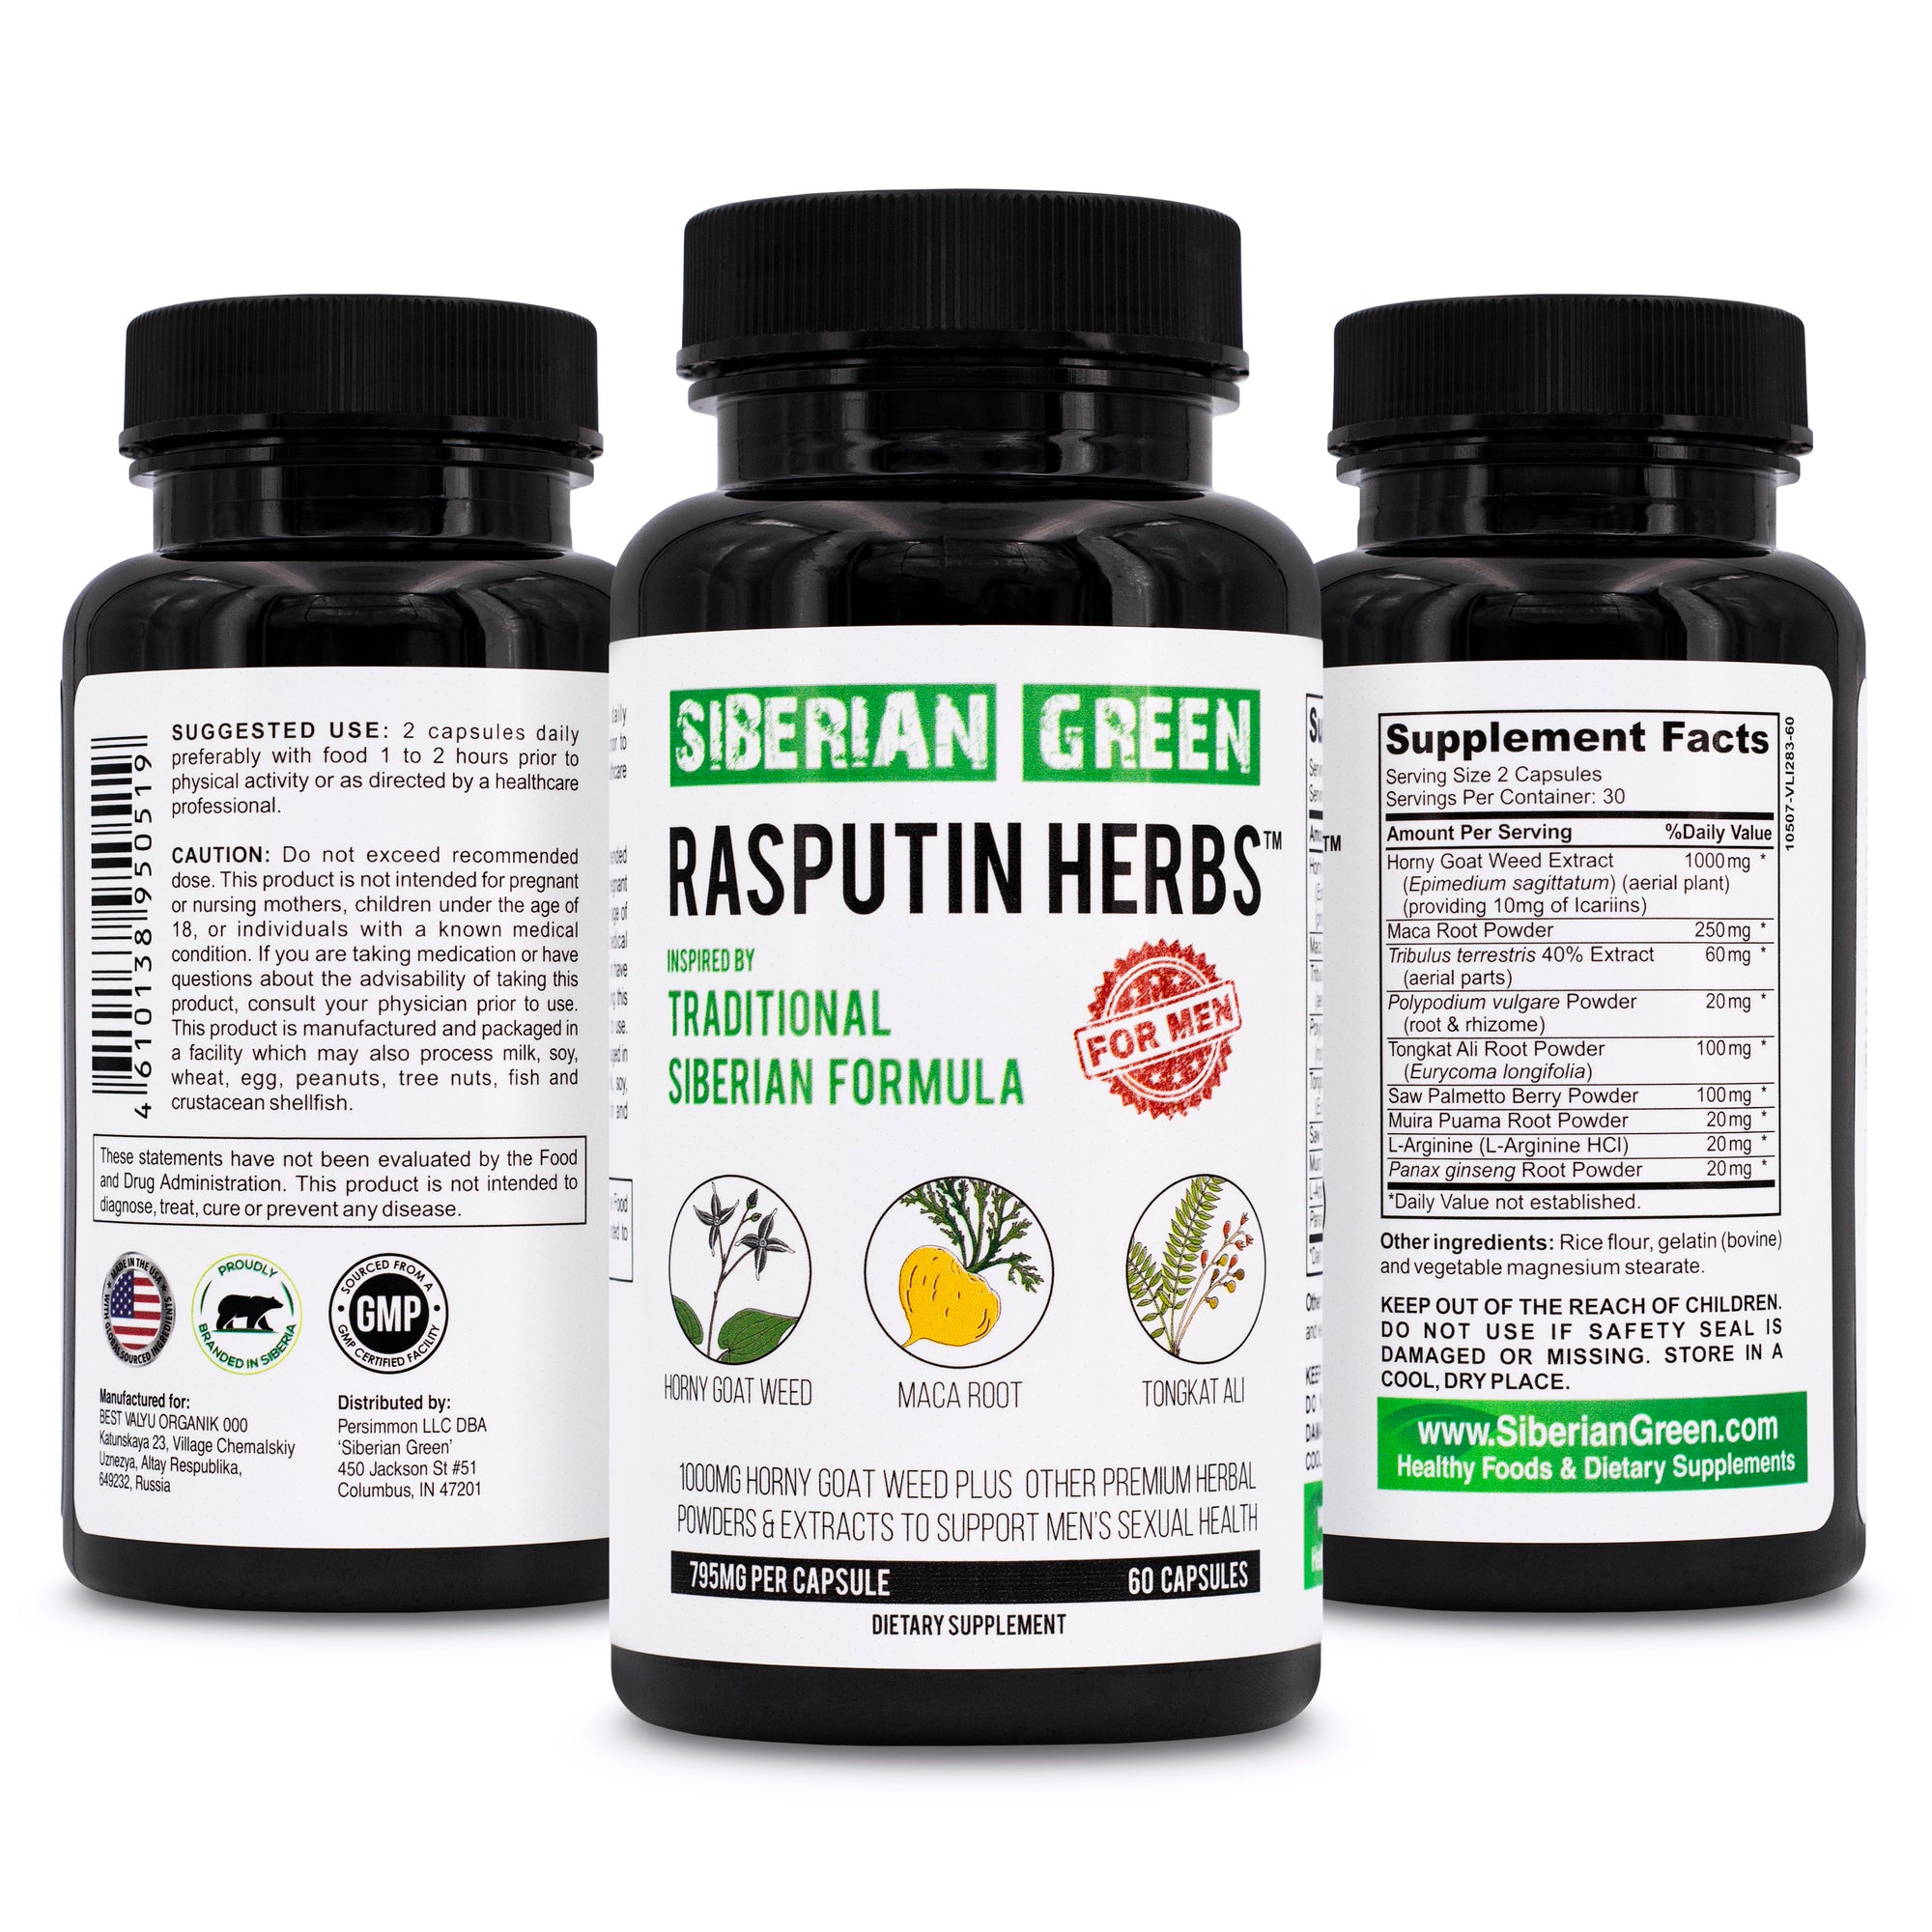 Does Rasputin gained his legendary power because of the use of Epimedium herb?